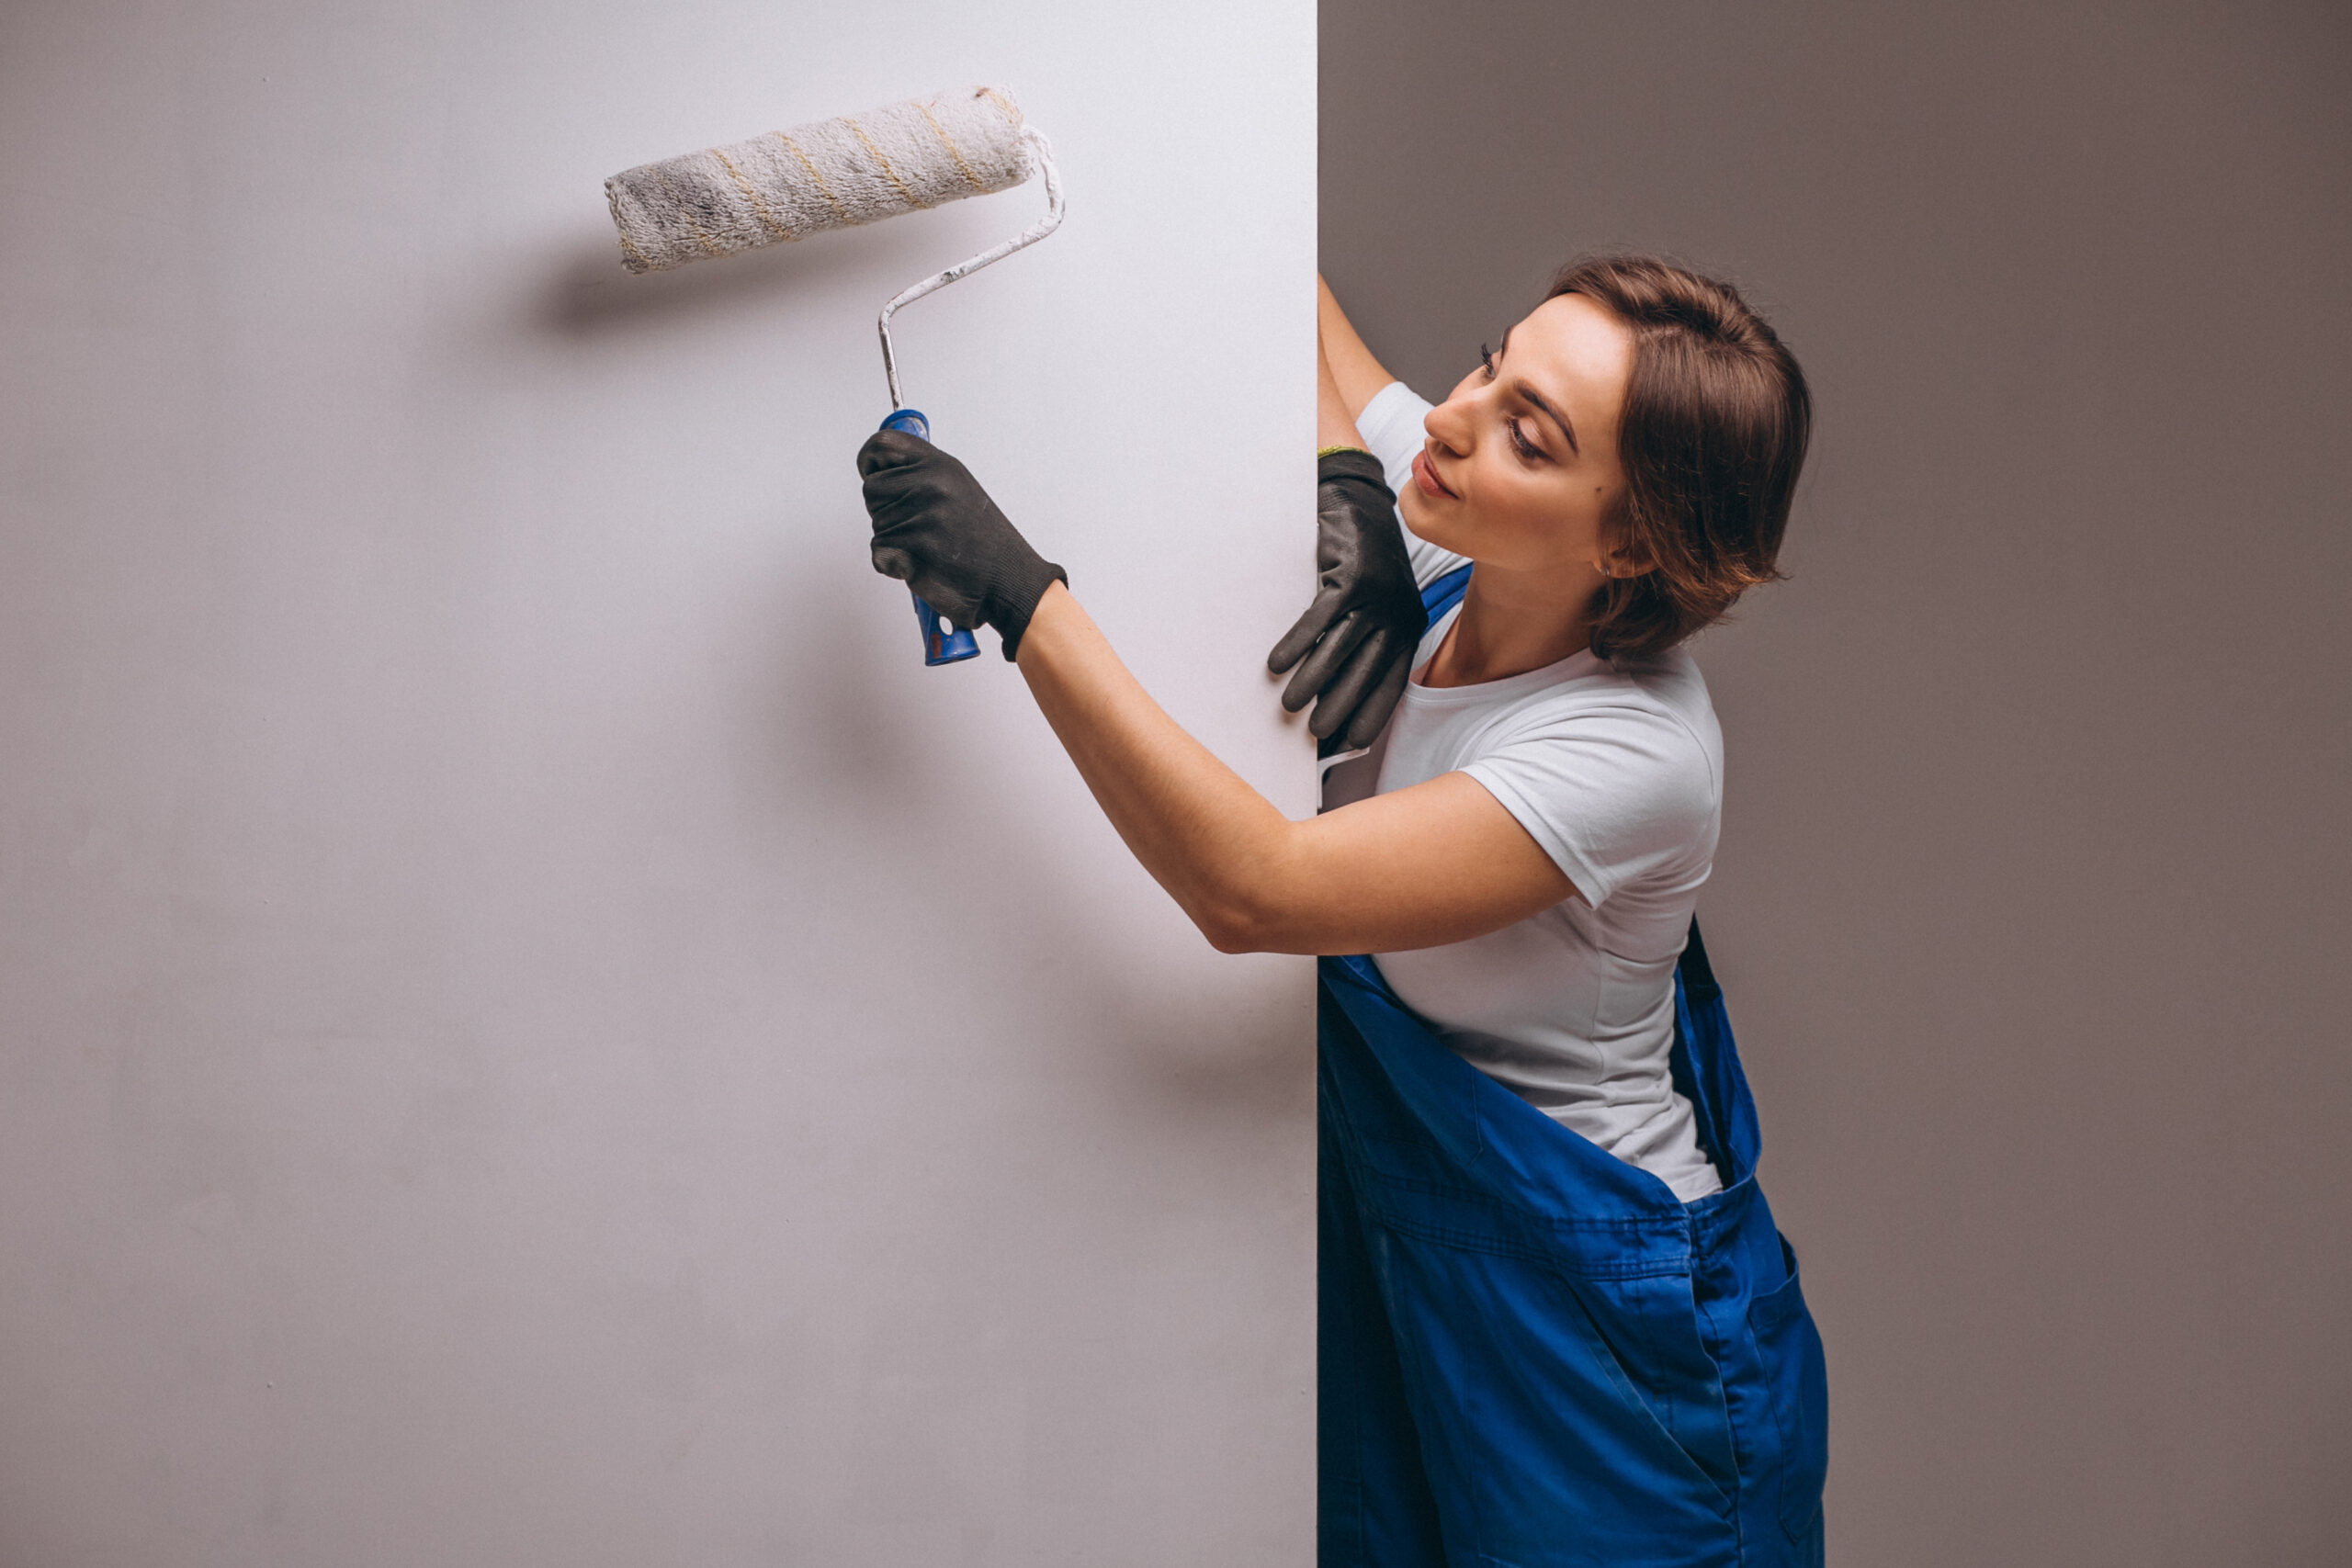 4 Realistic DIY Approaches to Home Improvement